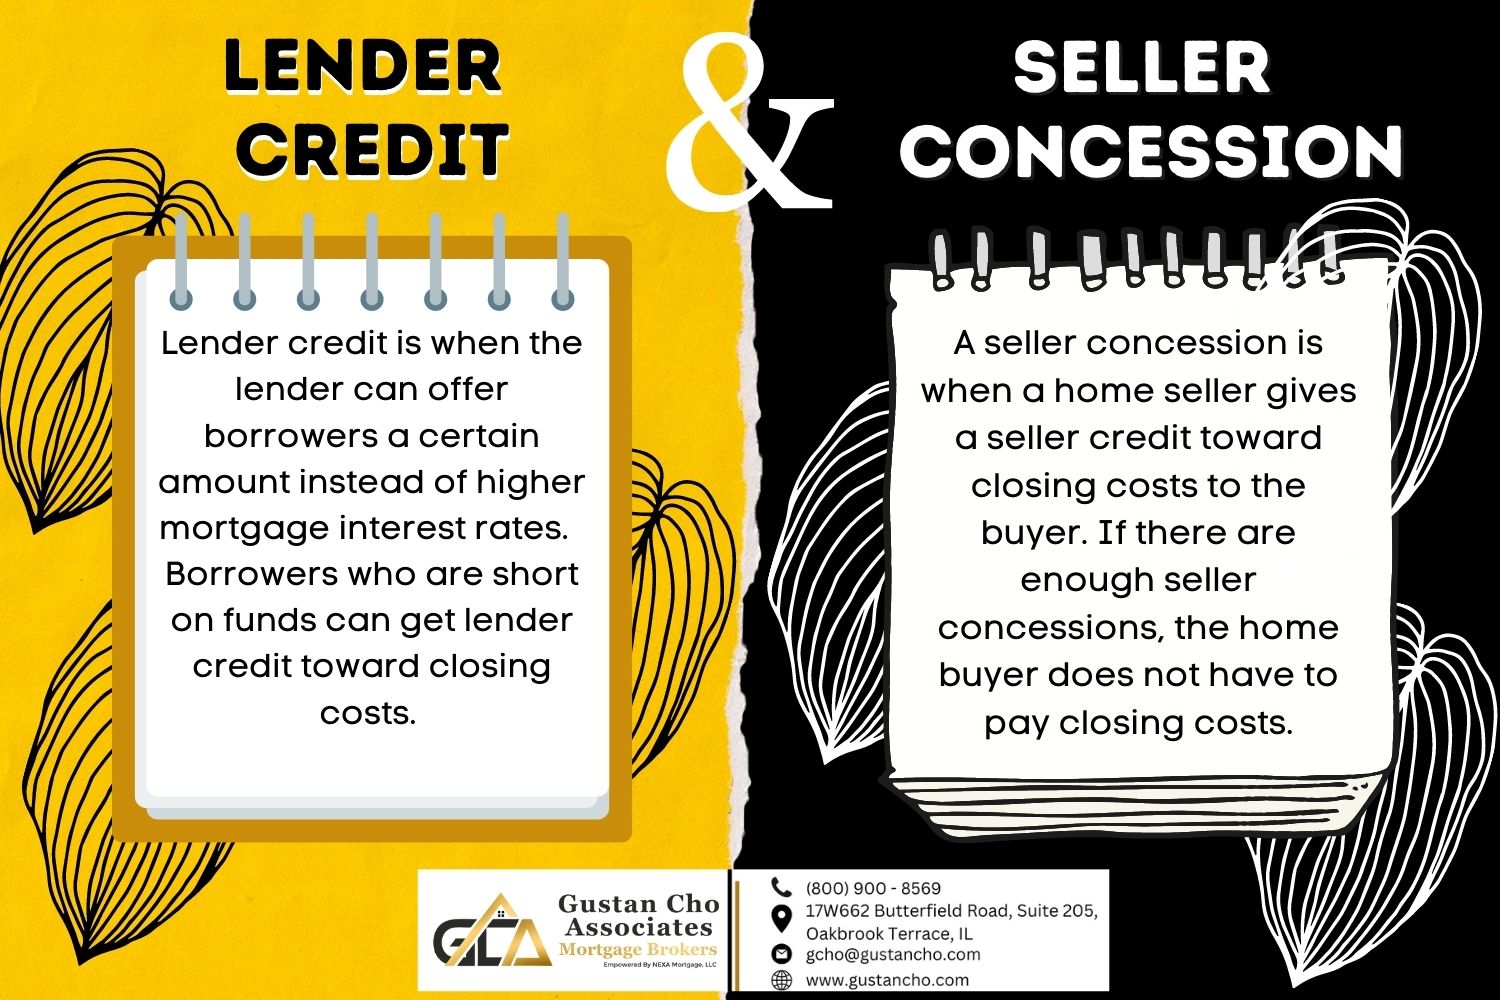 Lender Credit and Sellers Concessions For Closing Costs